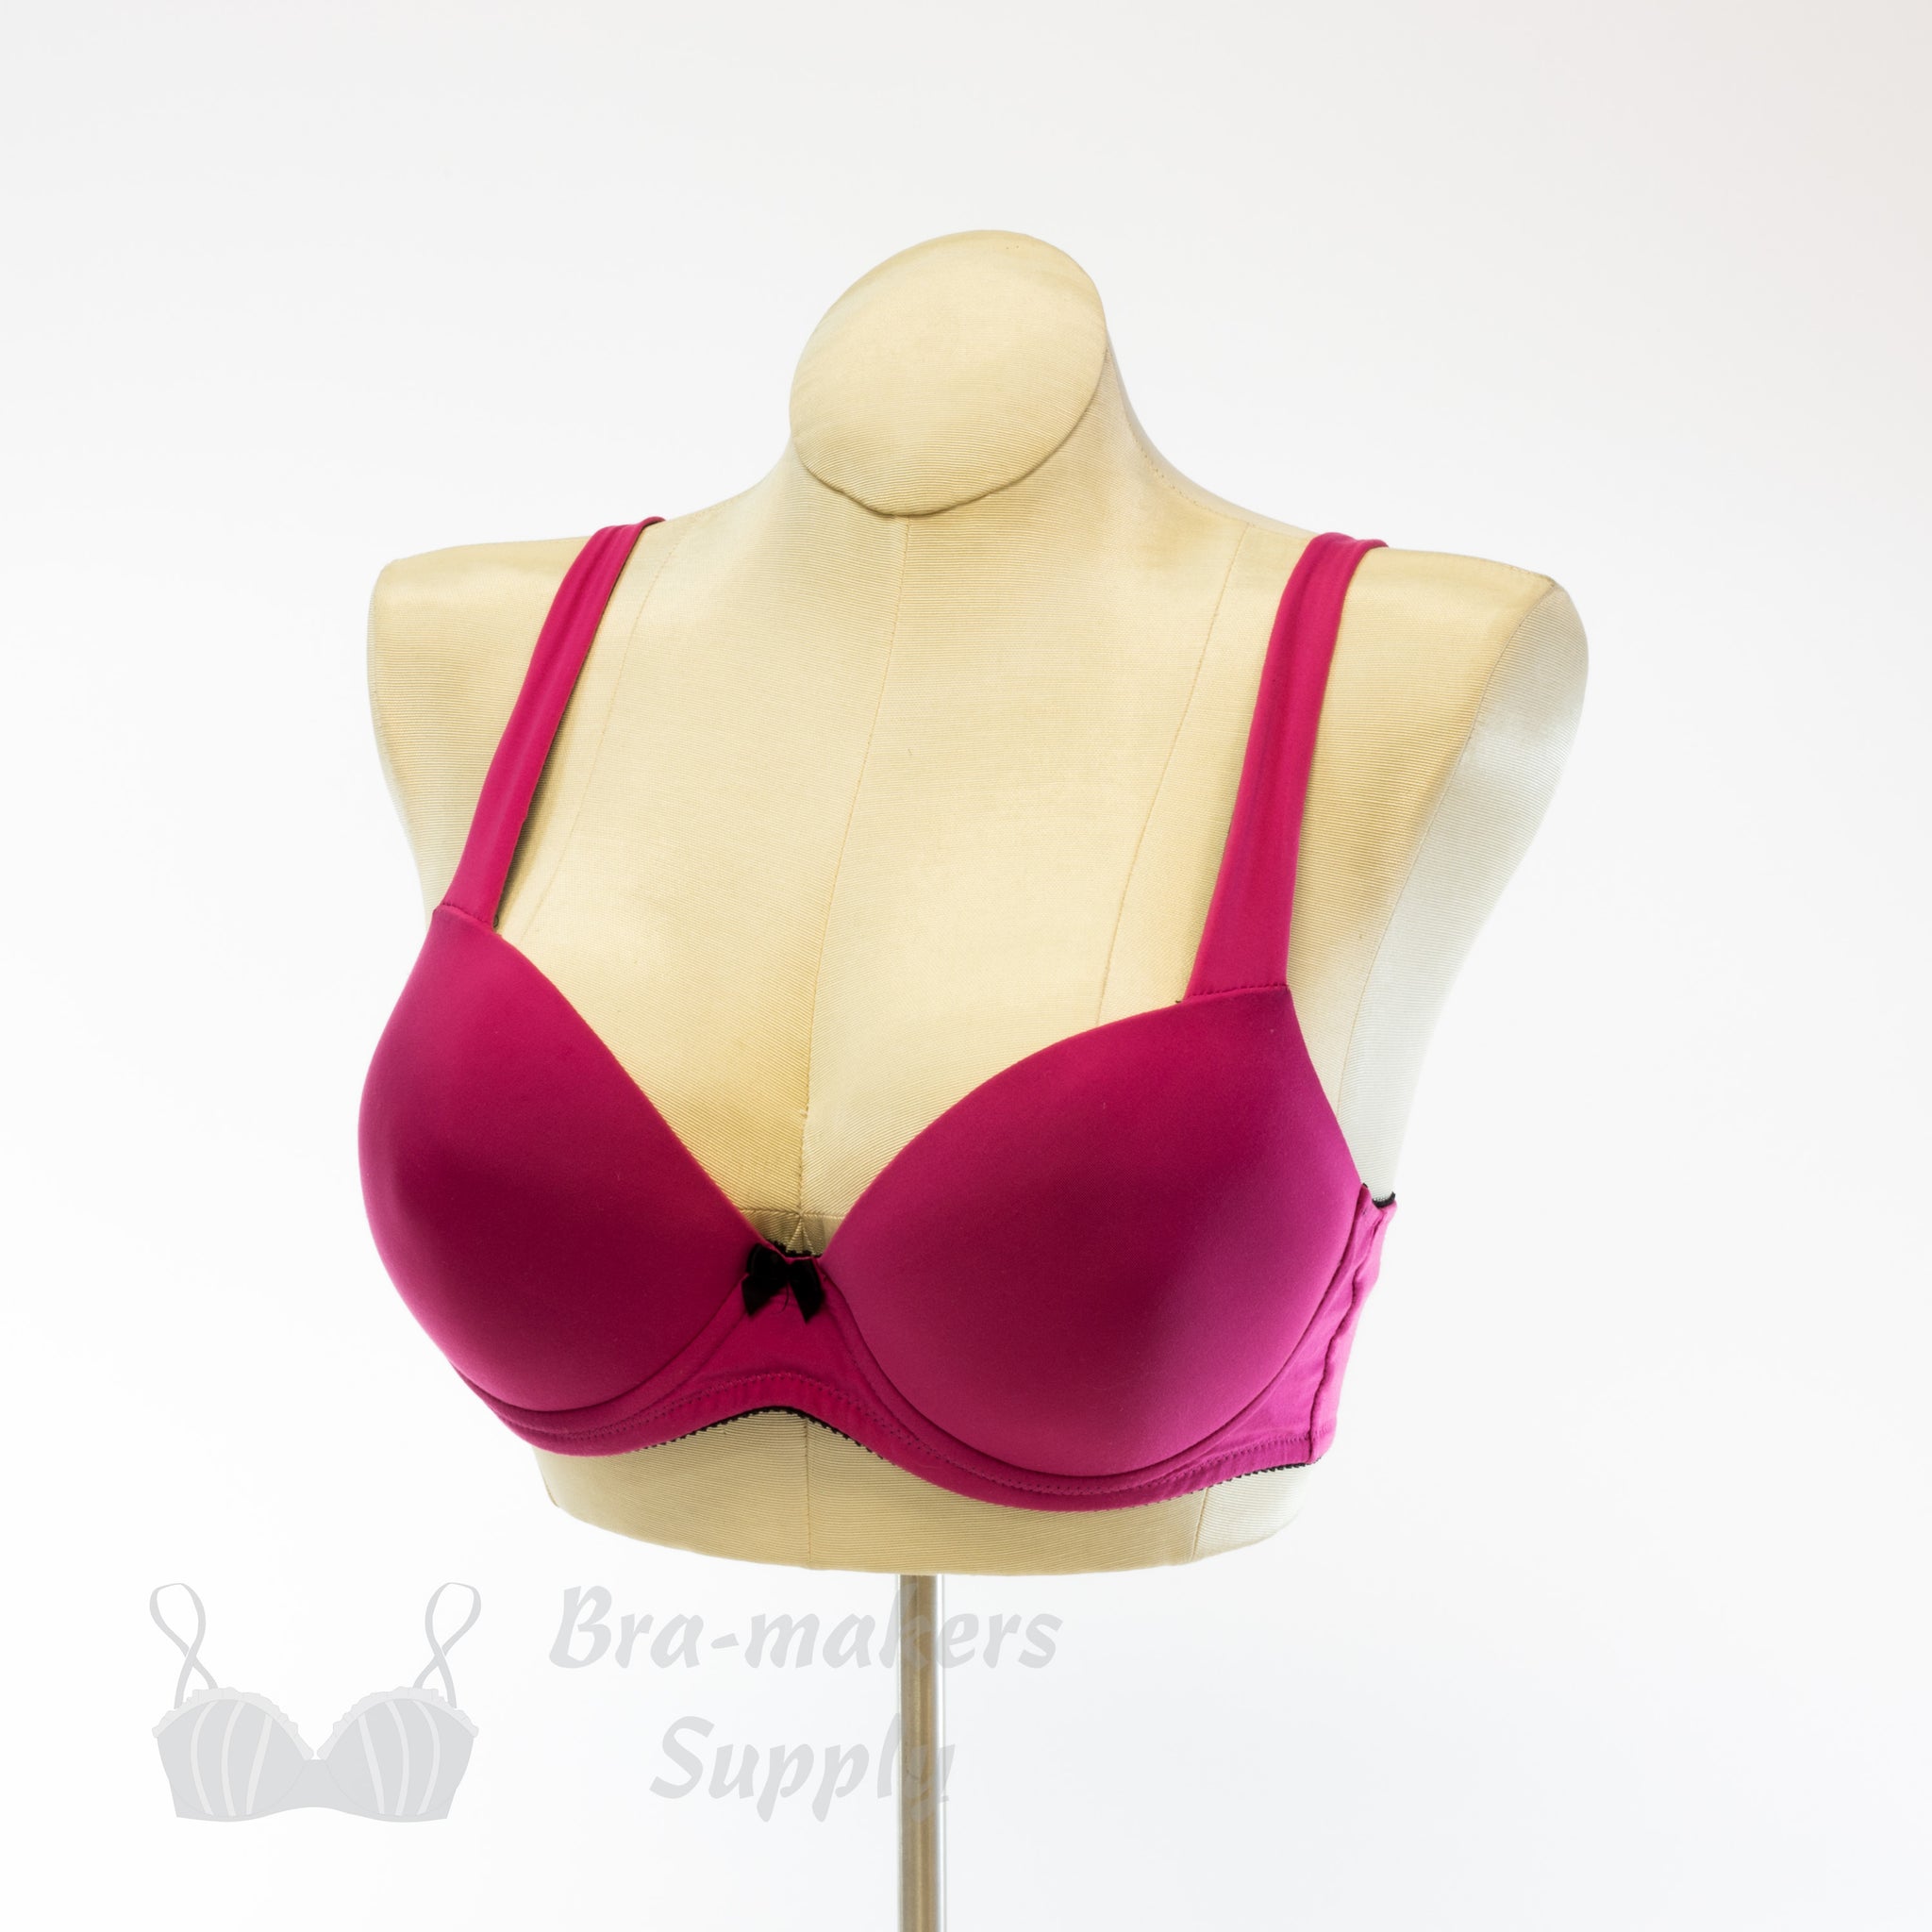 How to sew a foam cup on a bra ?